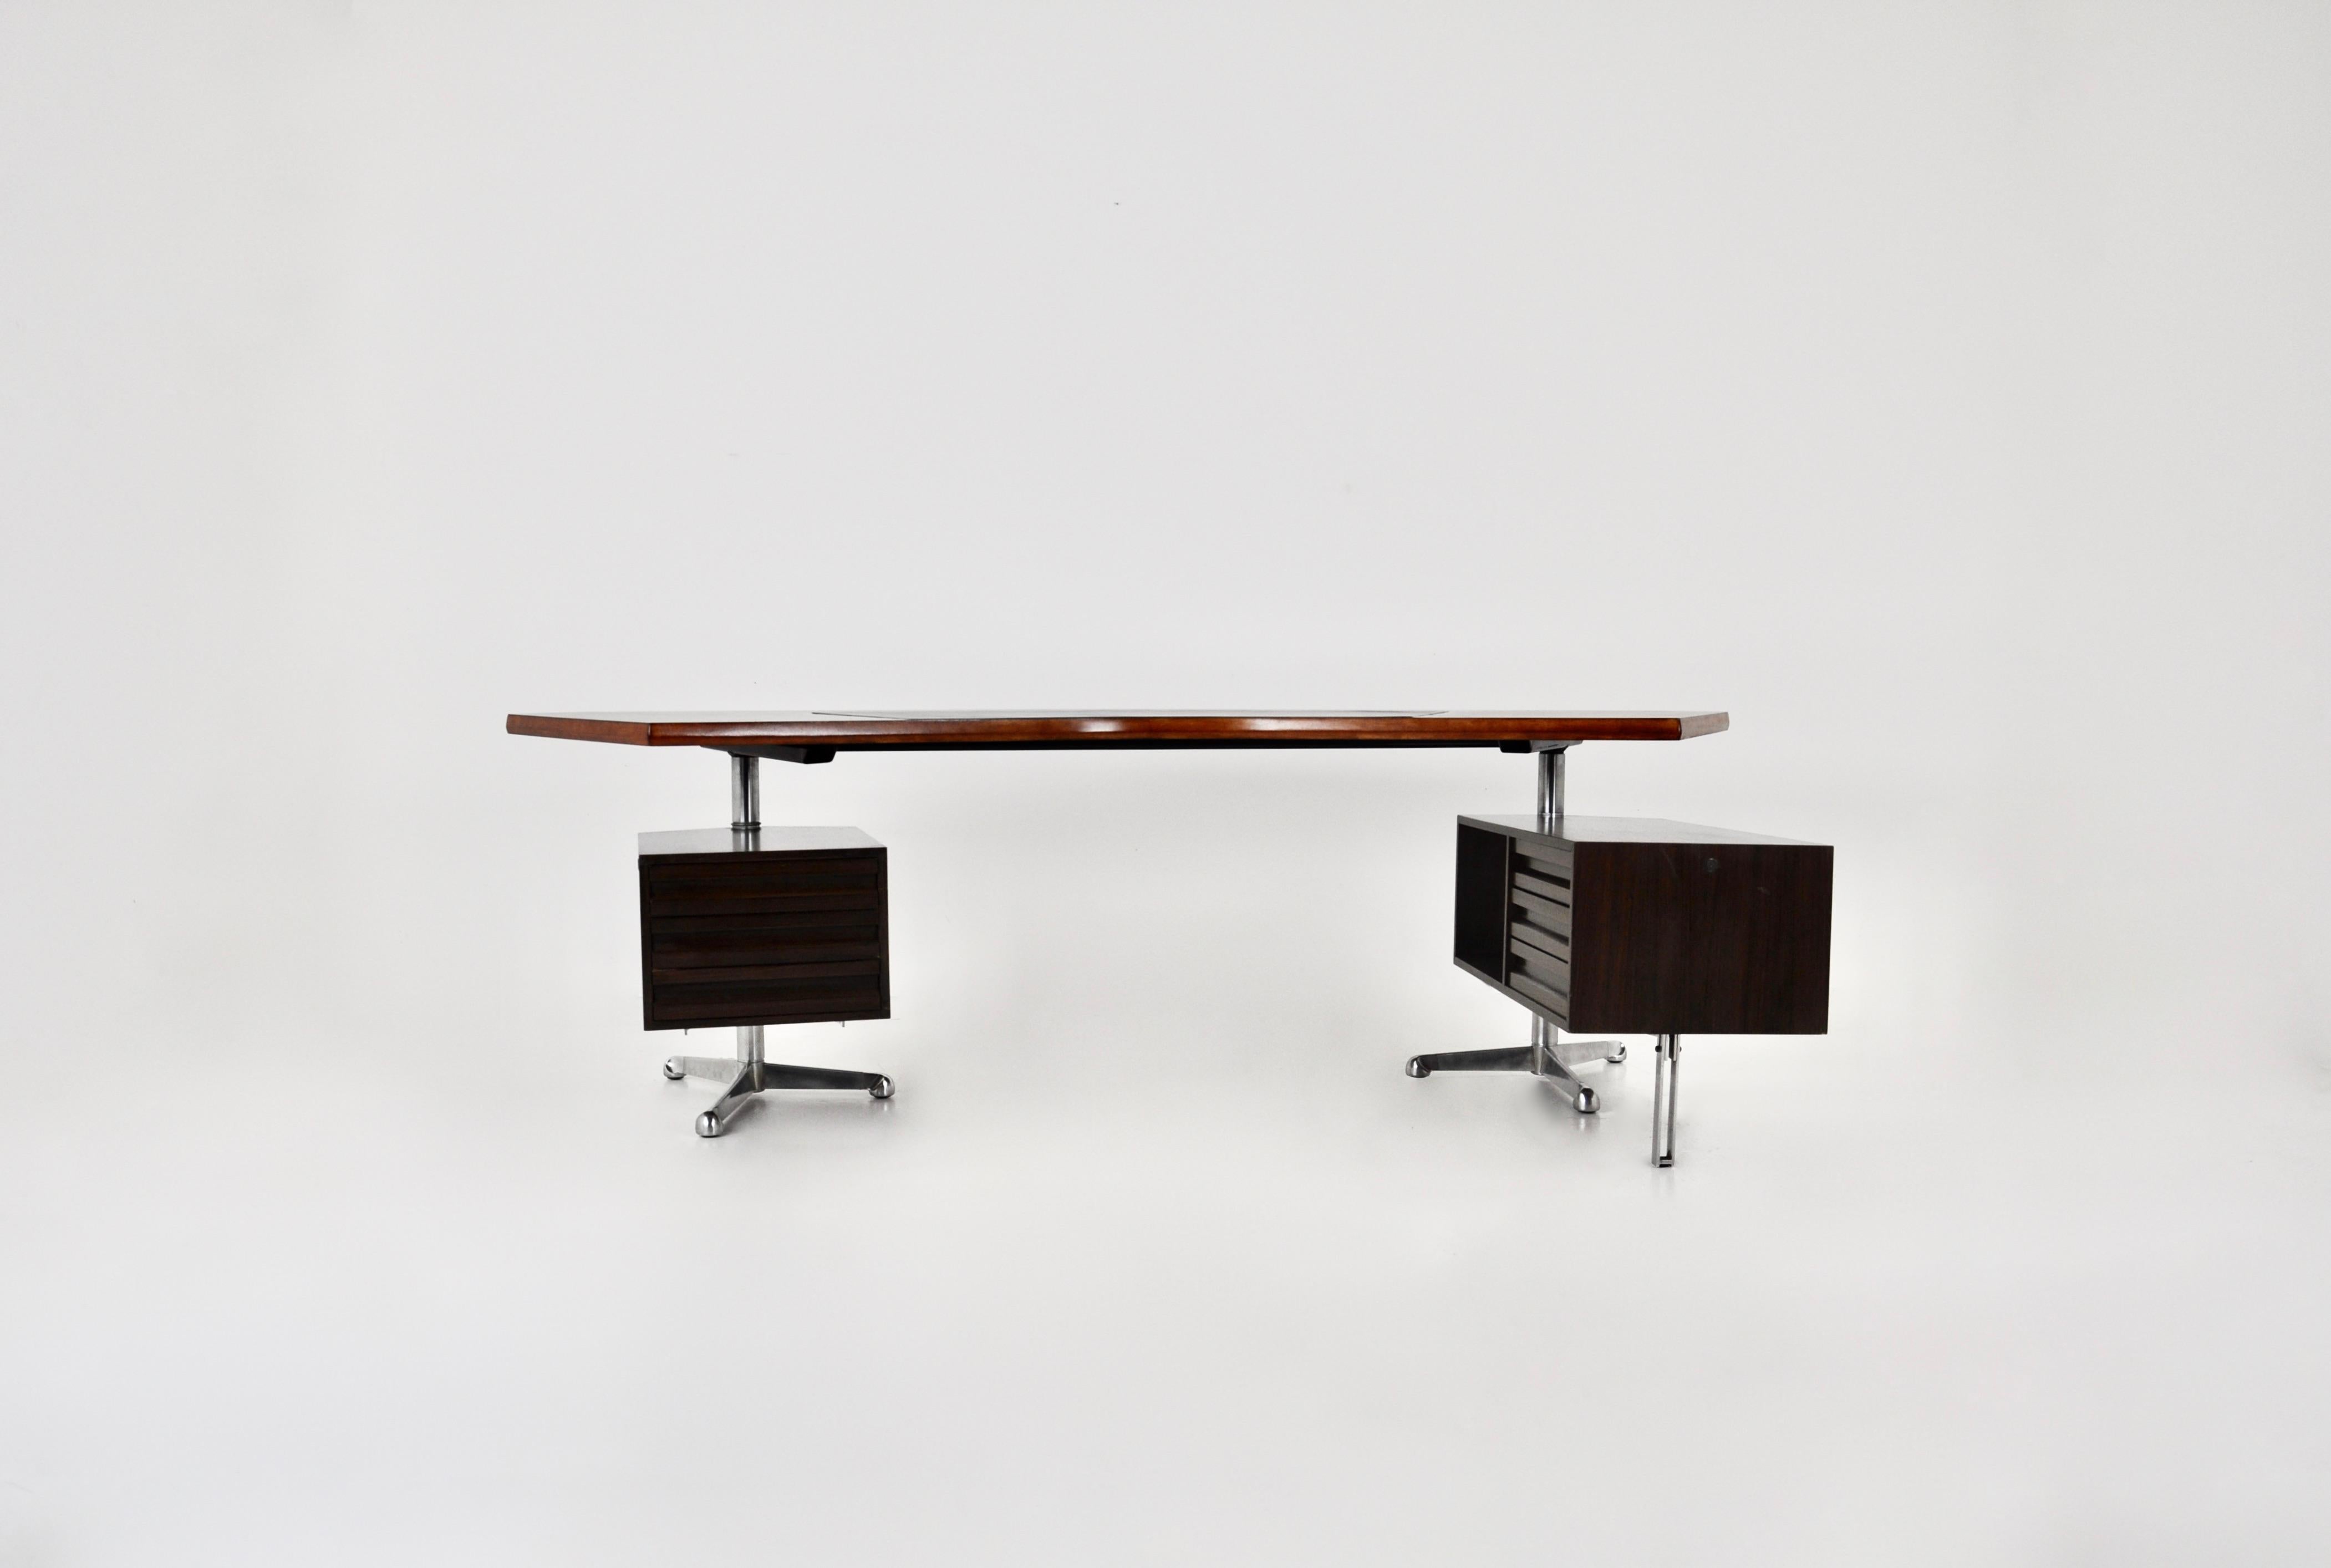 Desk in wood, metal and black leather. Stamped Tecno on the foot and in the drawer. 2 Modules, one with 3 drawers (Height: 54 cm, Length: 55 cm, Width: 42 cm) and another with 3 drawers and storage (Height: 54 cm, Length: 96 cm, Width: 42 cm). No